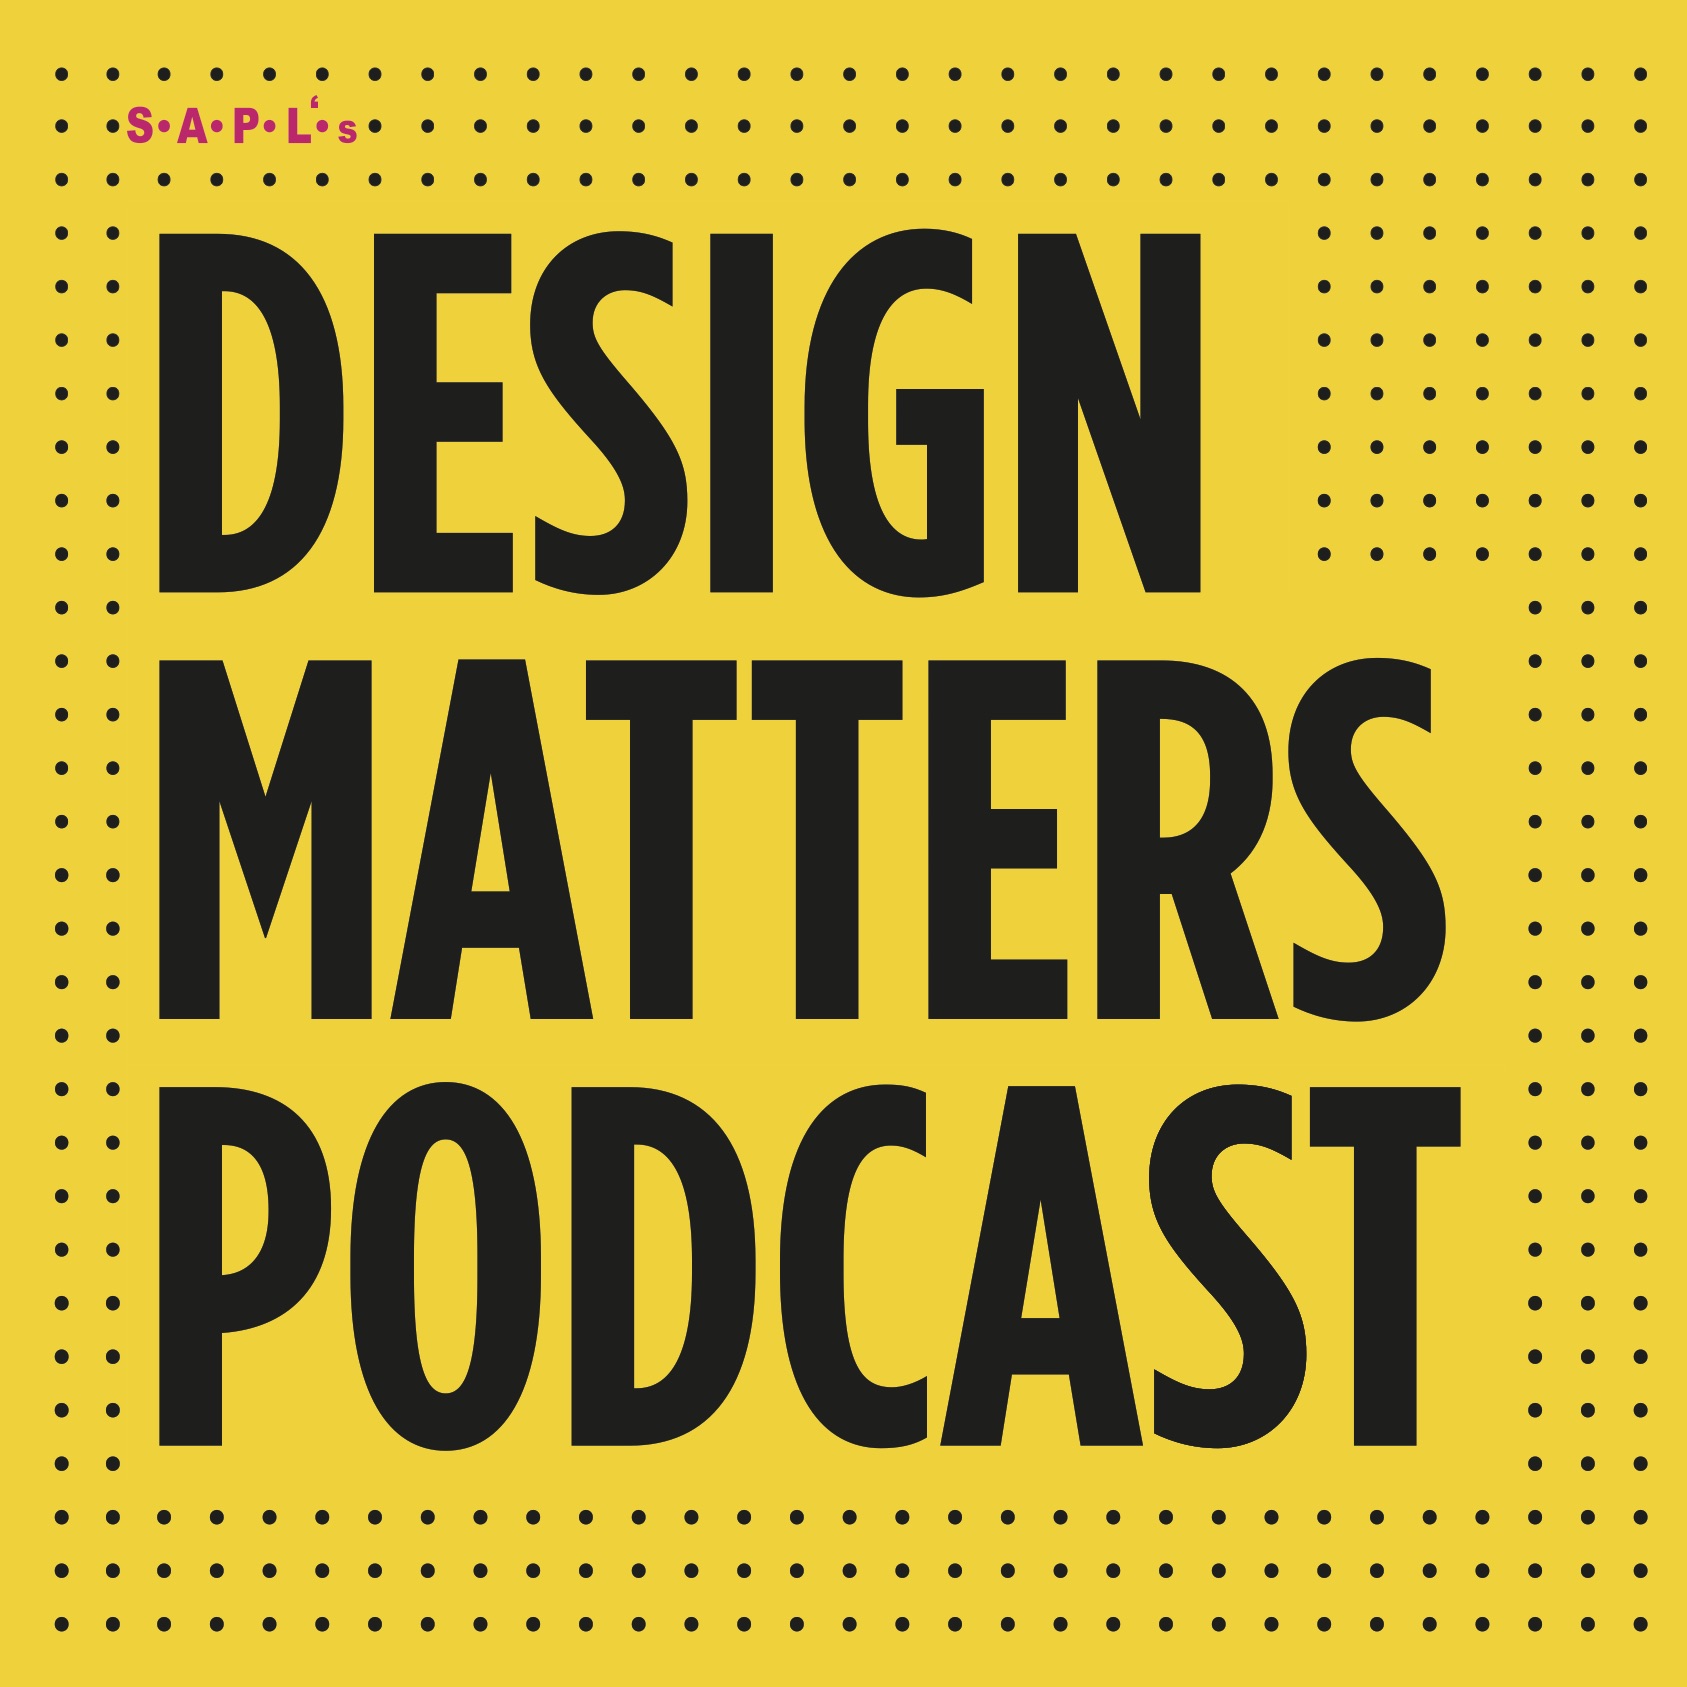 Design Matters - Podcast March 15, 2021